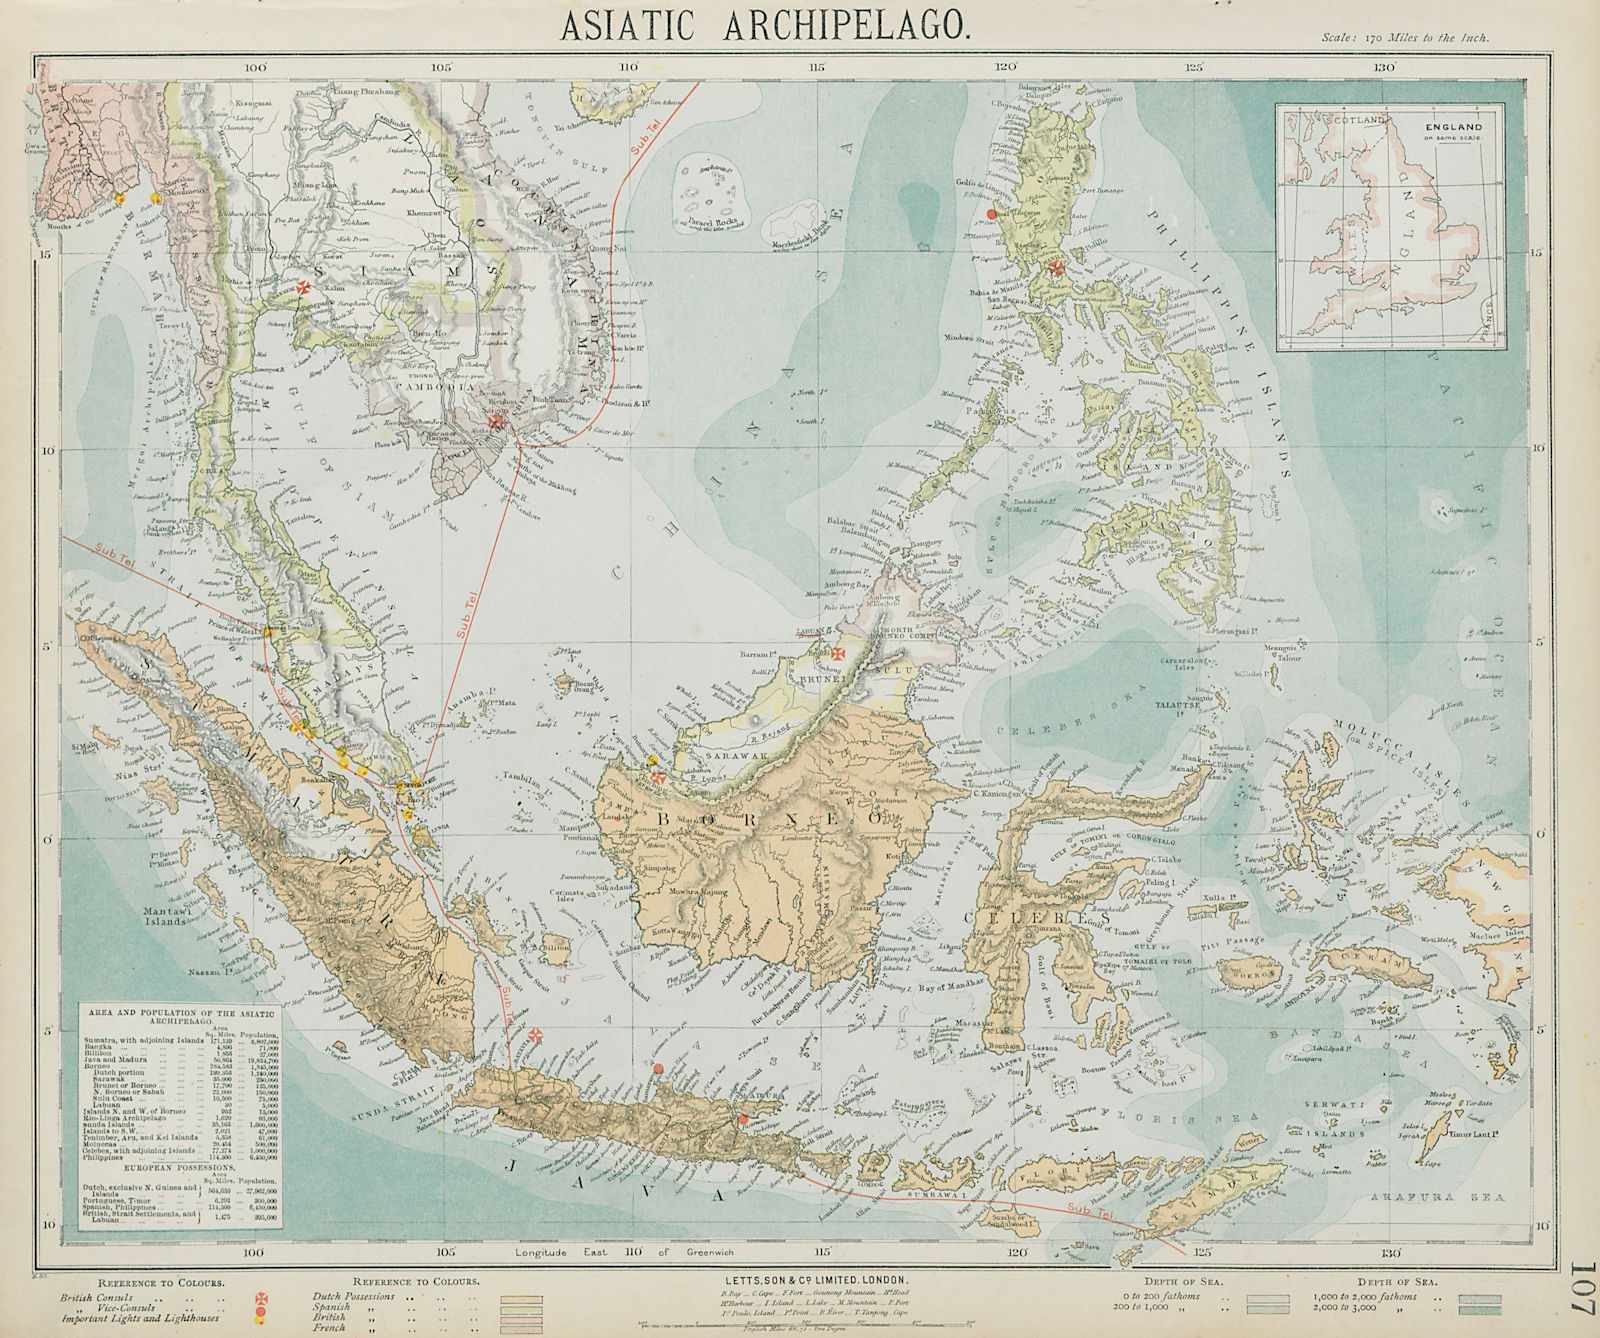 Asiatic Archipelago. Dutch East Indies. Indochina Philippines. LETTS 1884 map